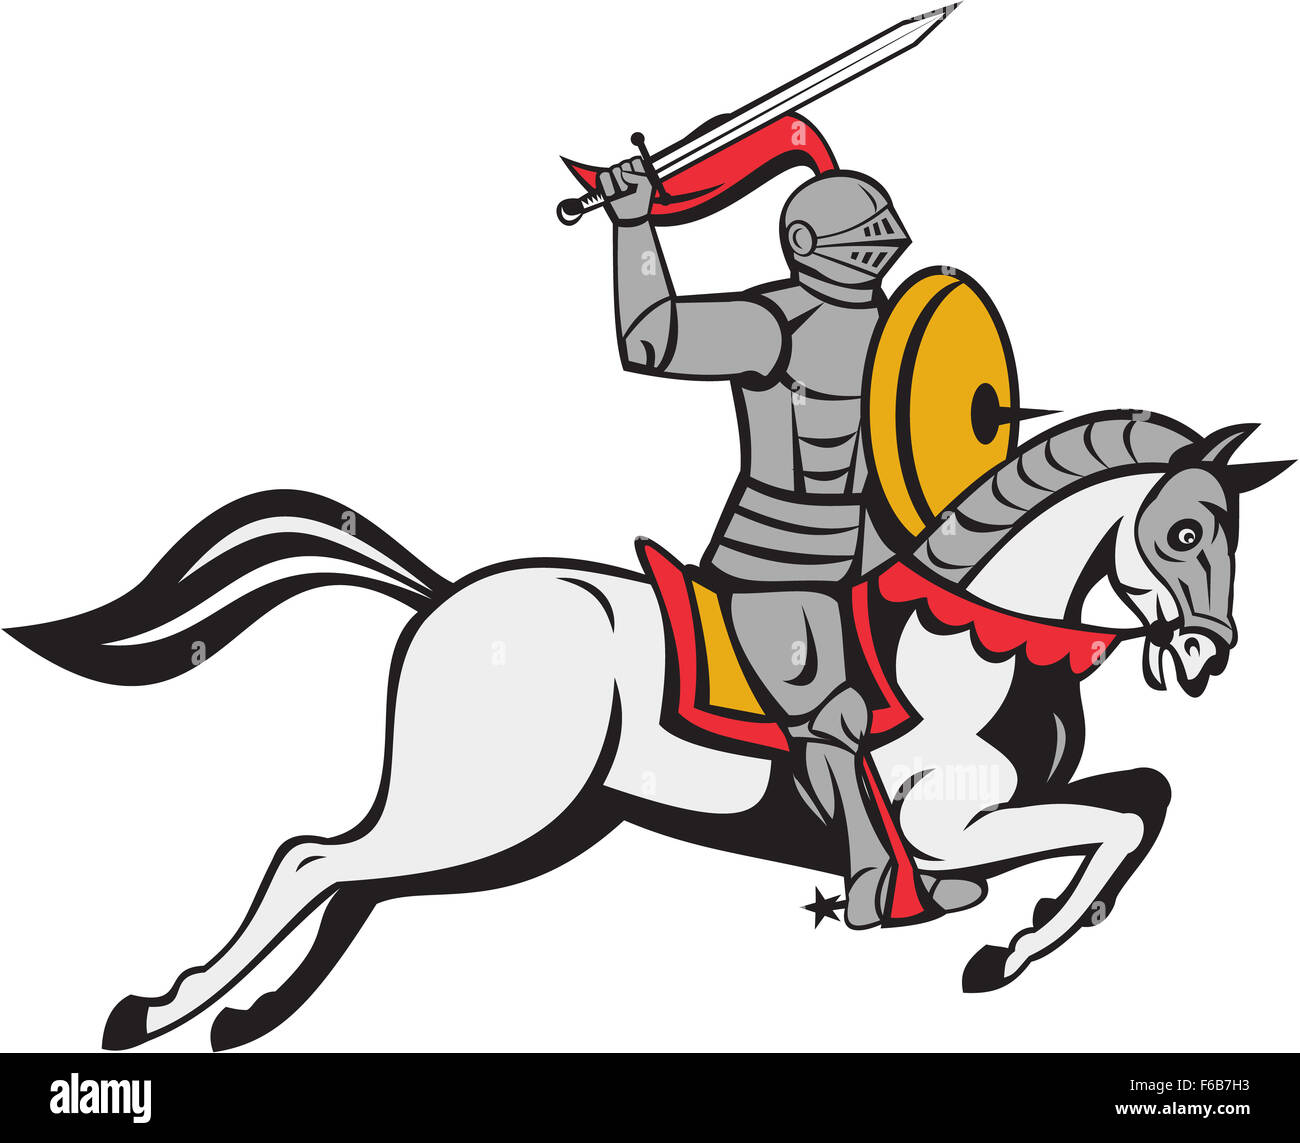 Cartoon style illustration of a knight in full armor holding sword on one hand over head and shield on the other hand riding horse steed attacking viewed from the side set on isolated white background. Stock Photo